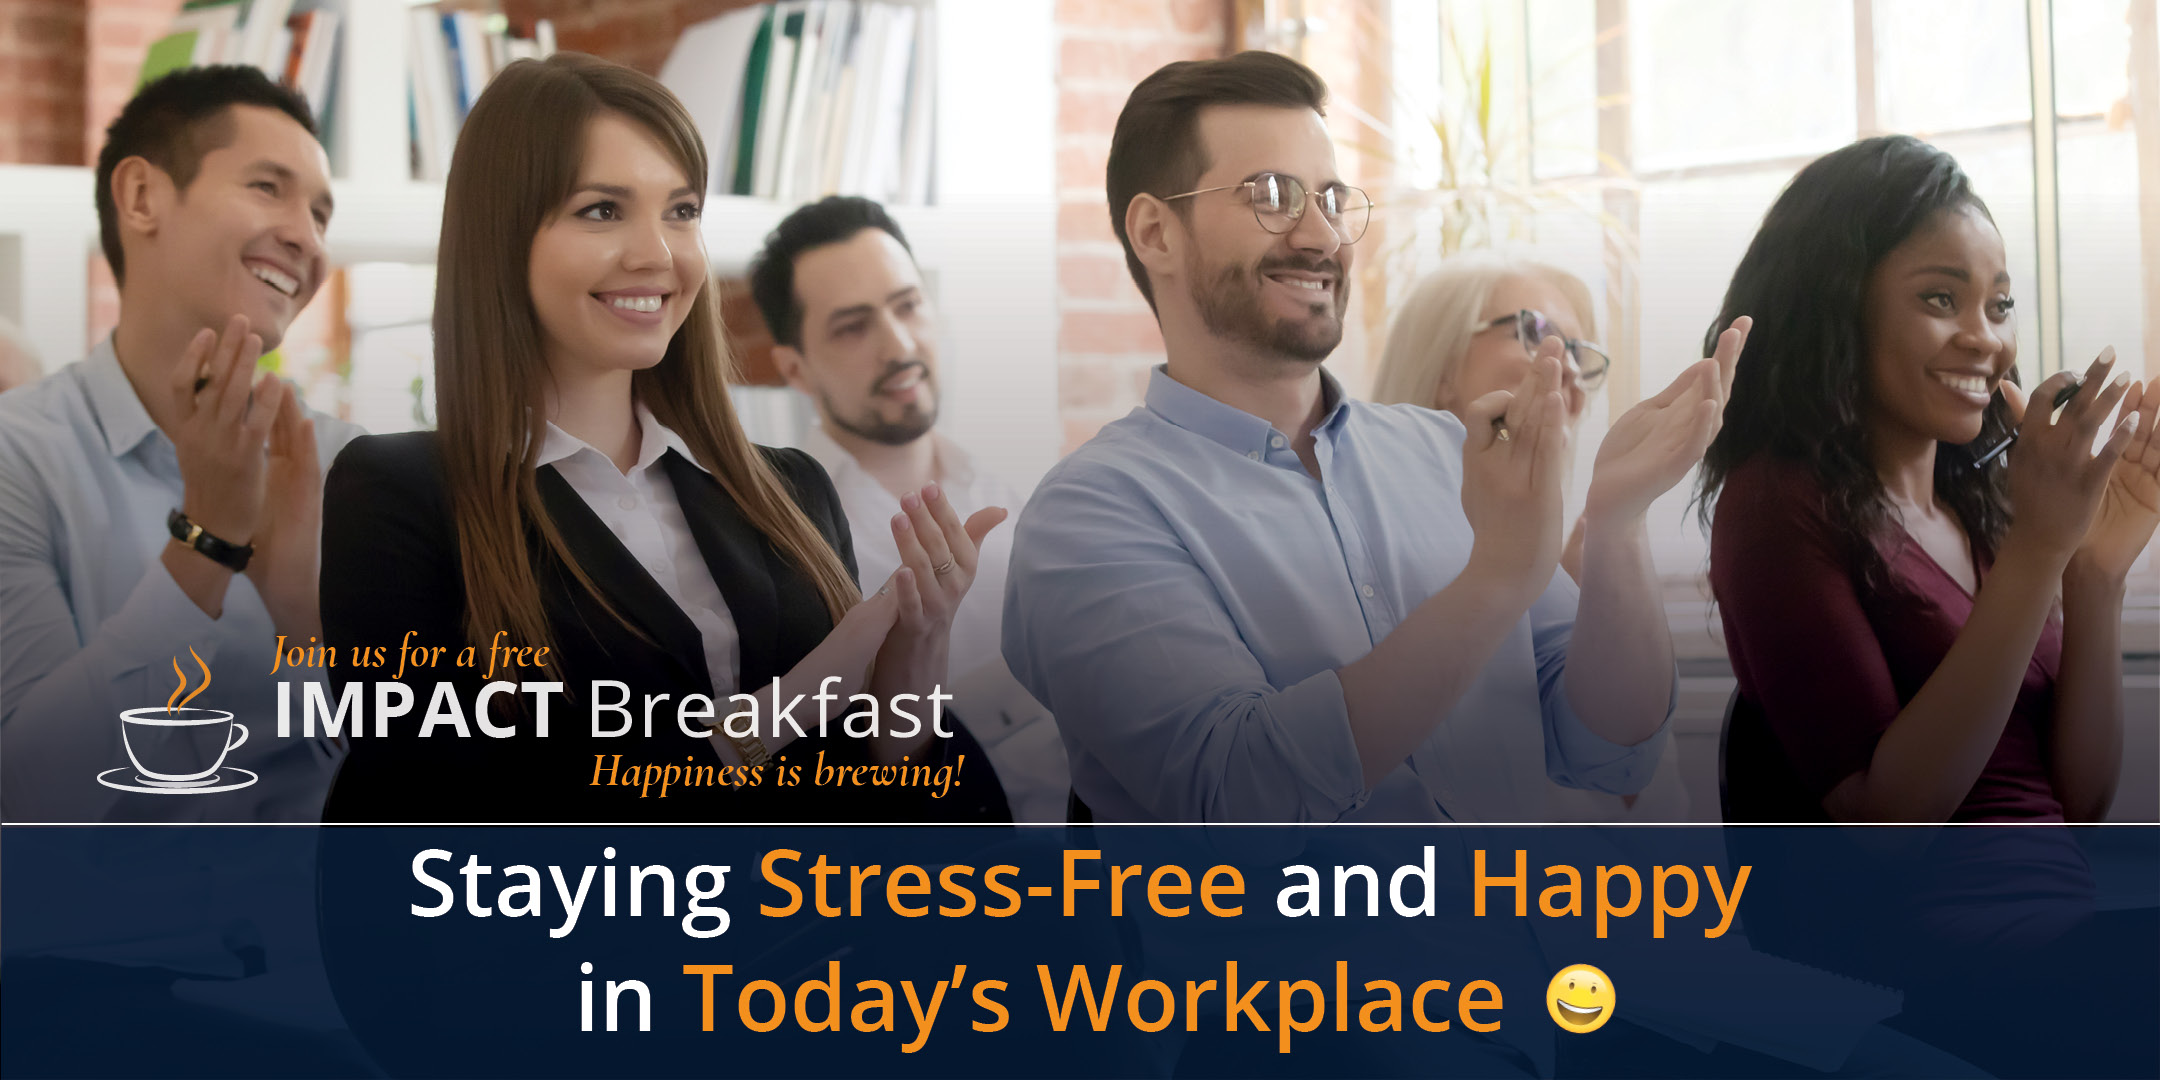 Impact Breakfast Webinar: Staying Stress-Free and Happy in Today's Workplace